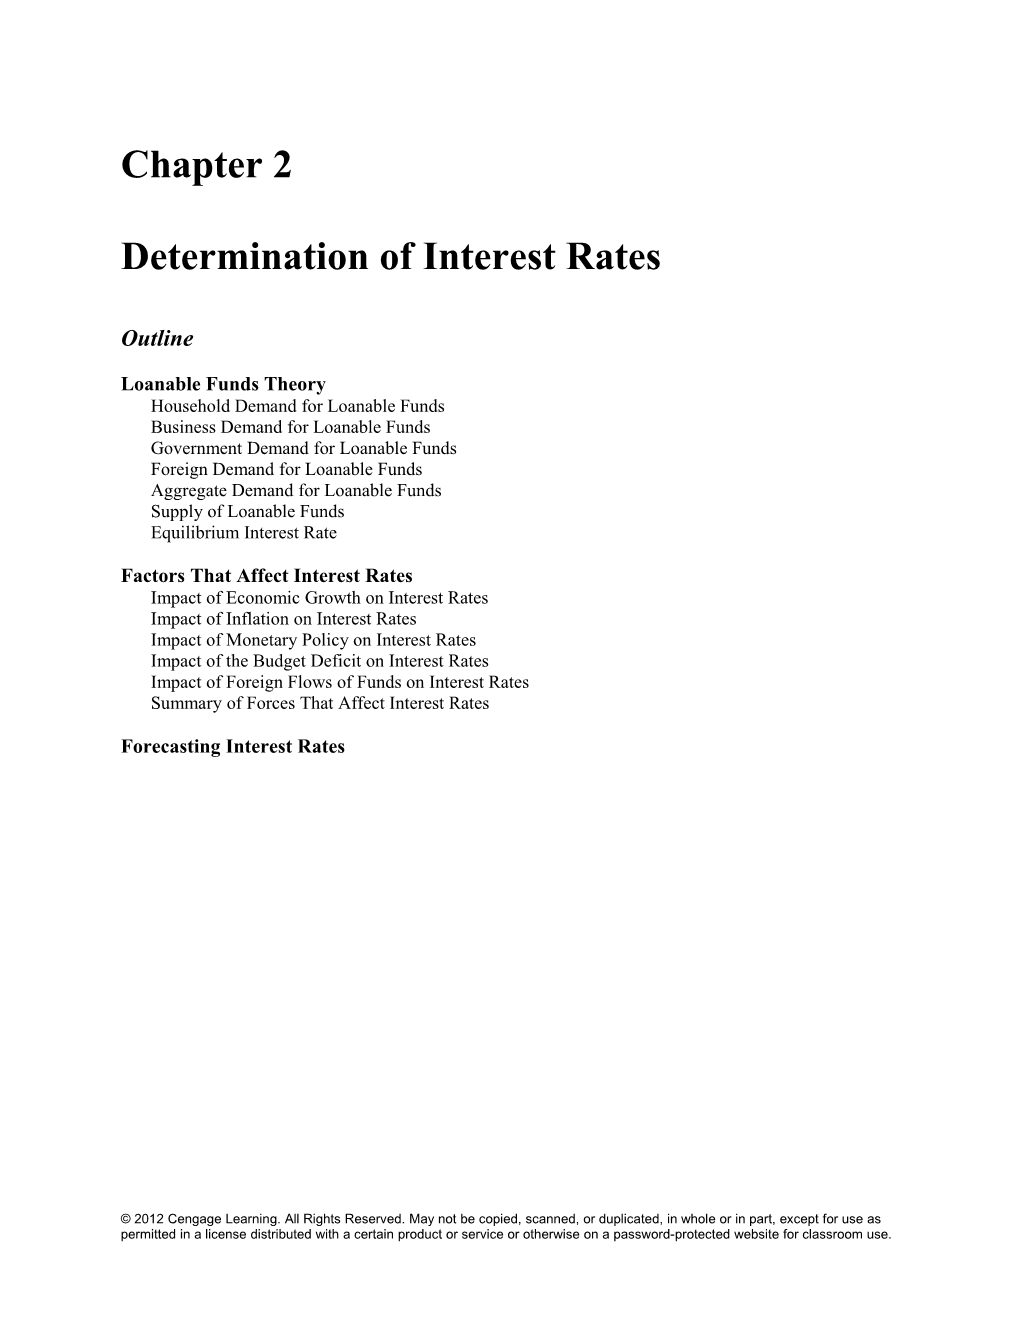 Chapter 2: Determination of Interest Rates 1